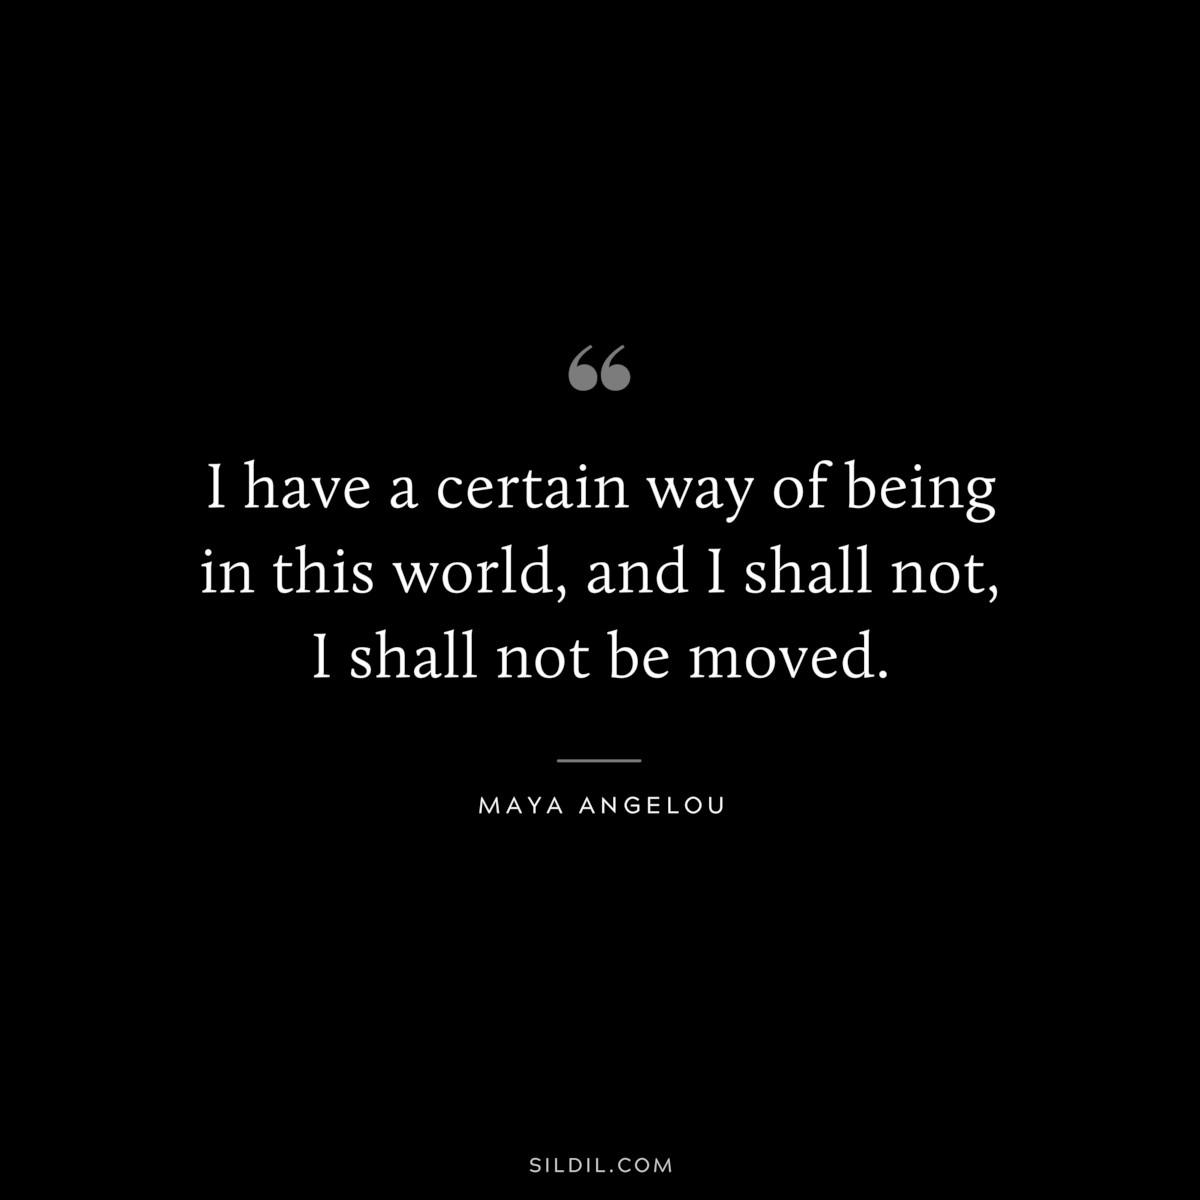 I have a certain way of being in this world, and I shall not, I shall not be moved. ― Maya Angelou